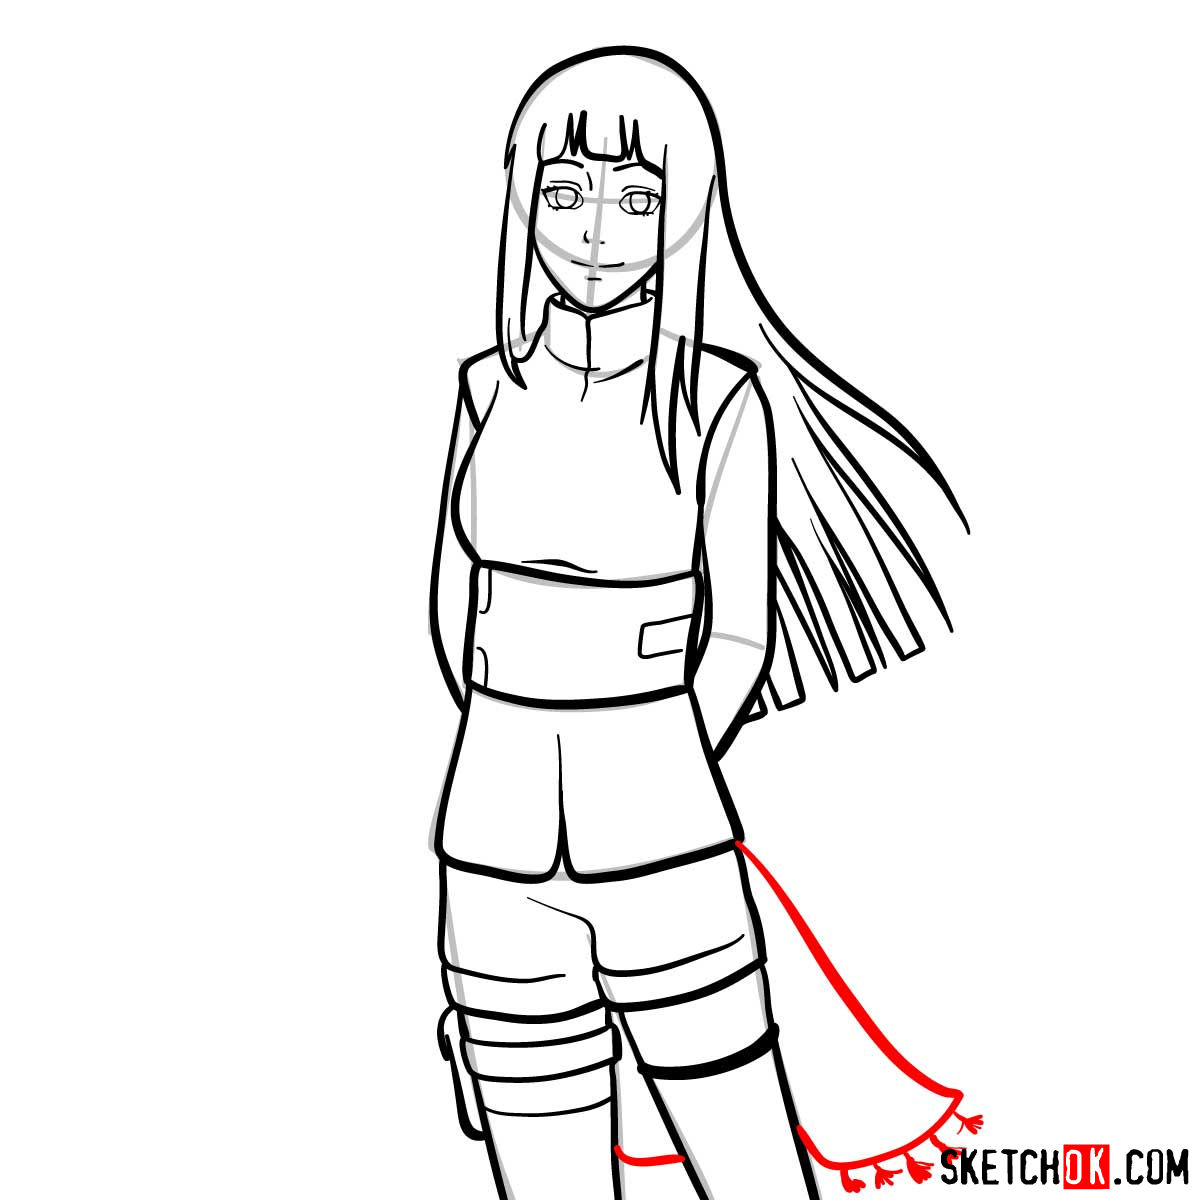 how to draw hinata from naruto anime sketchok easy drawing guides